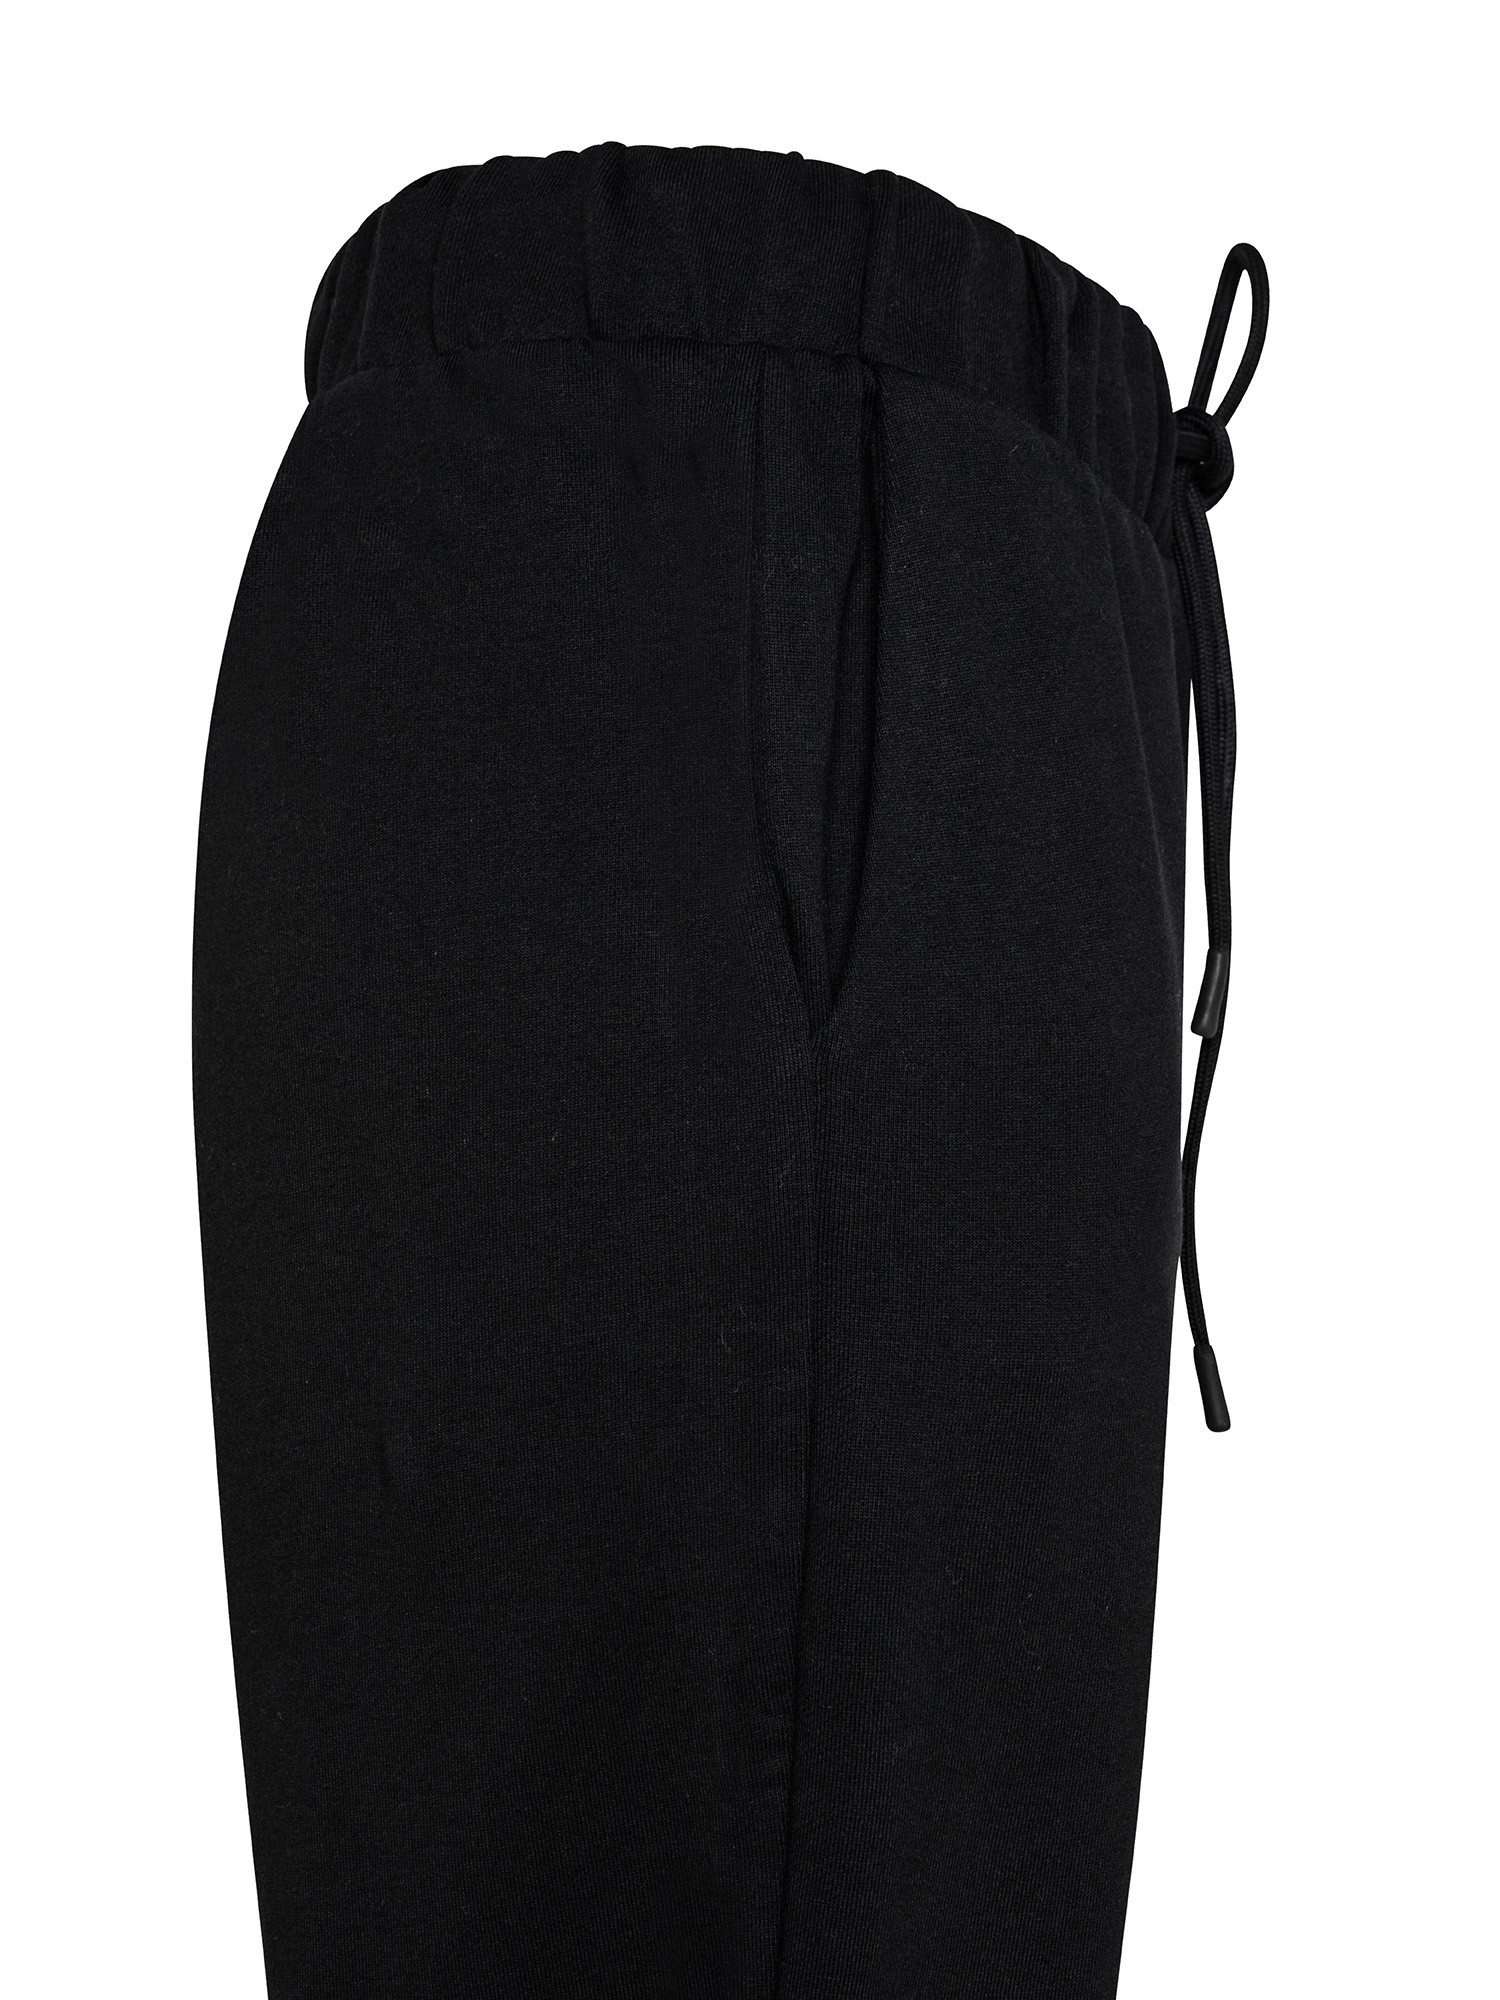 Ecoalf - Mills trousers with elasticated waist, Black, large image number 2